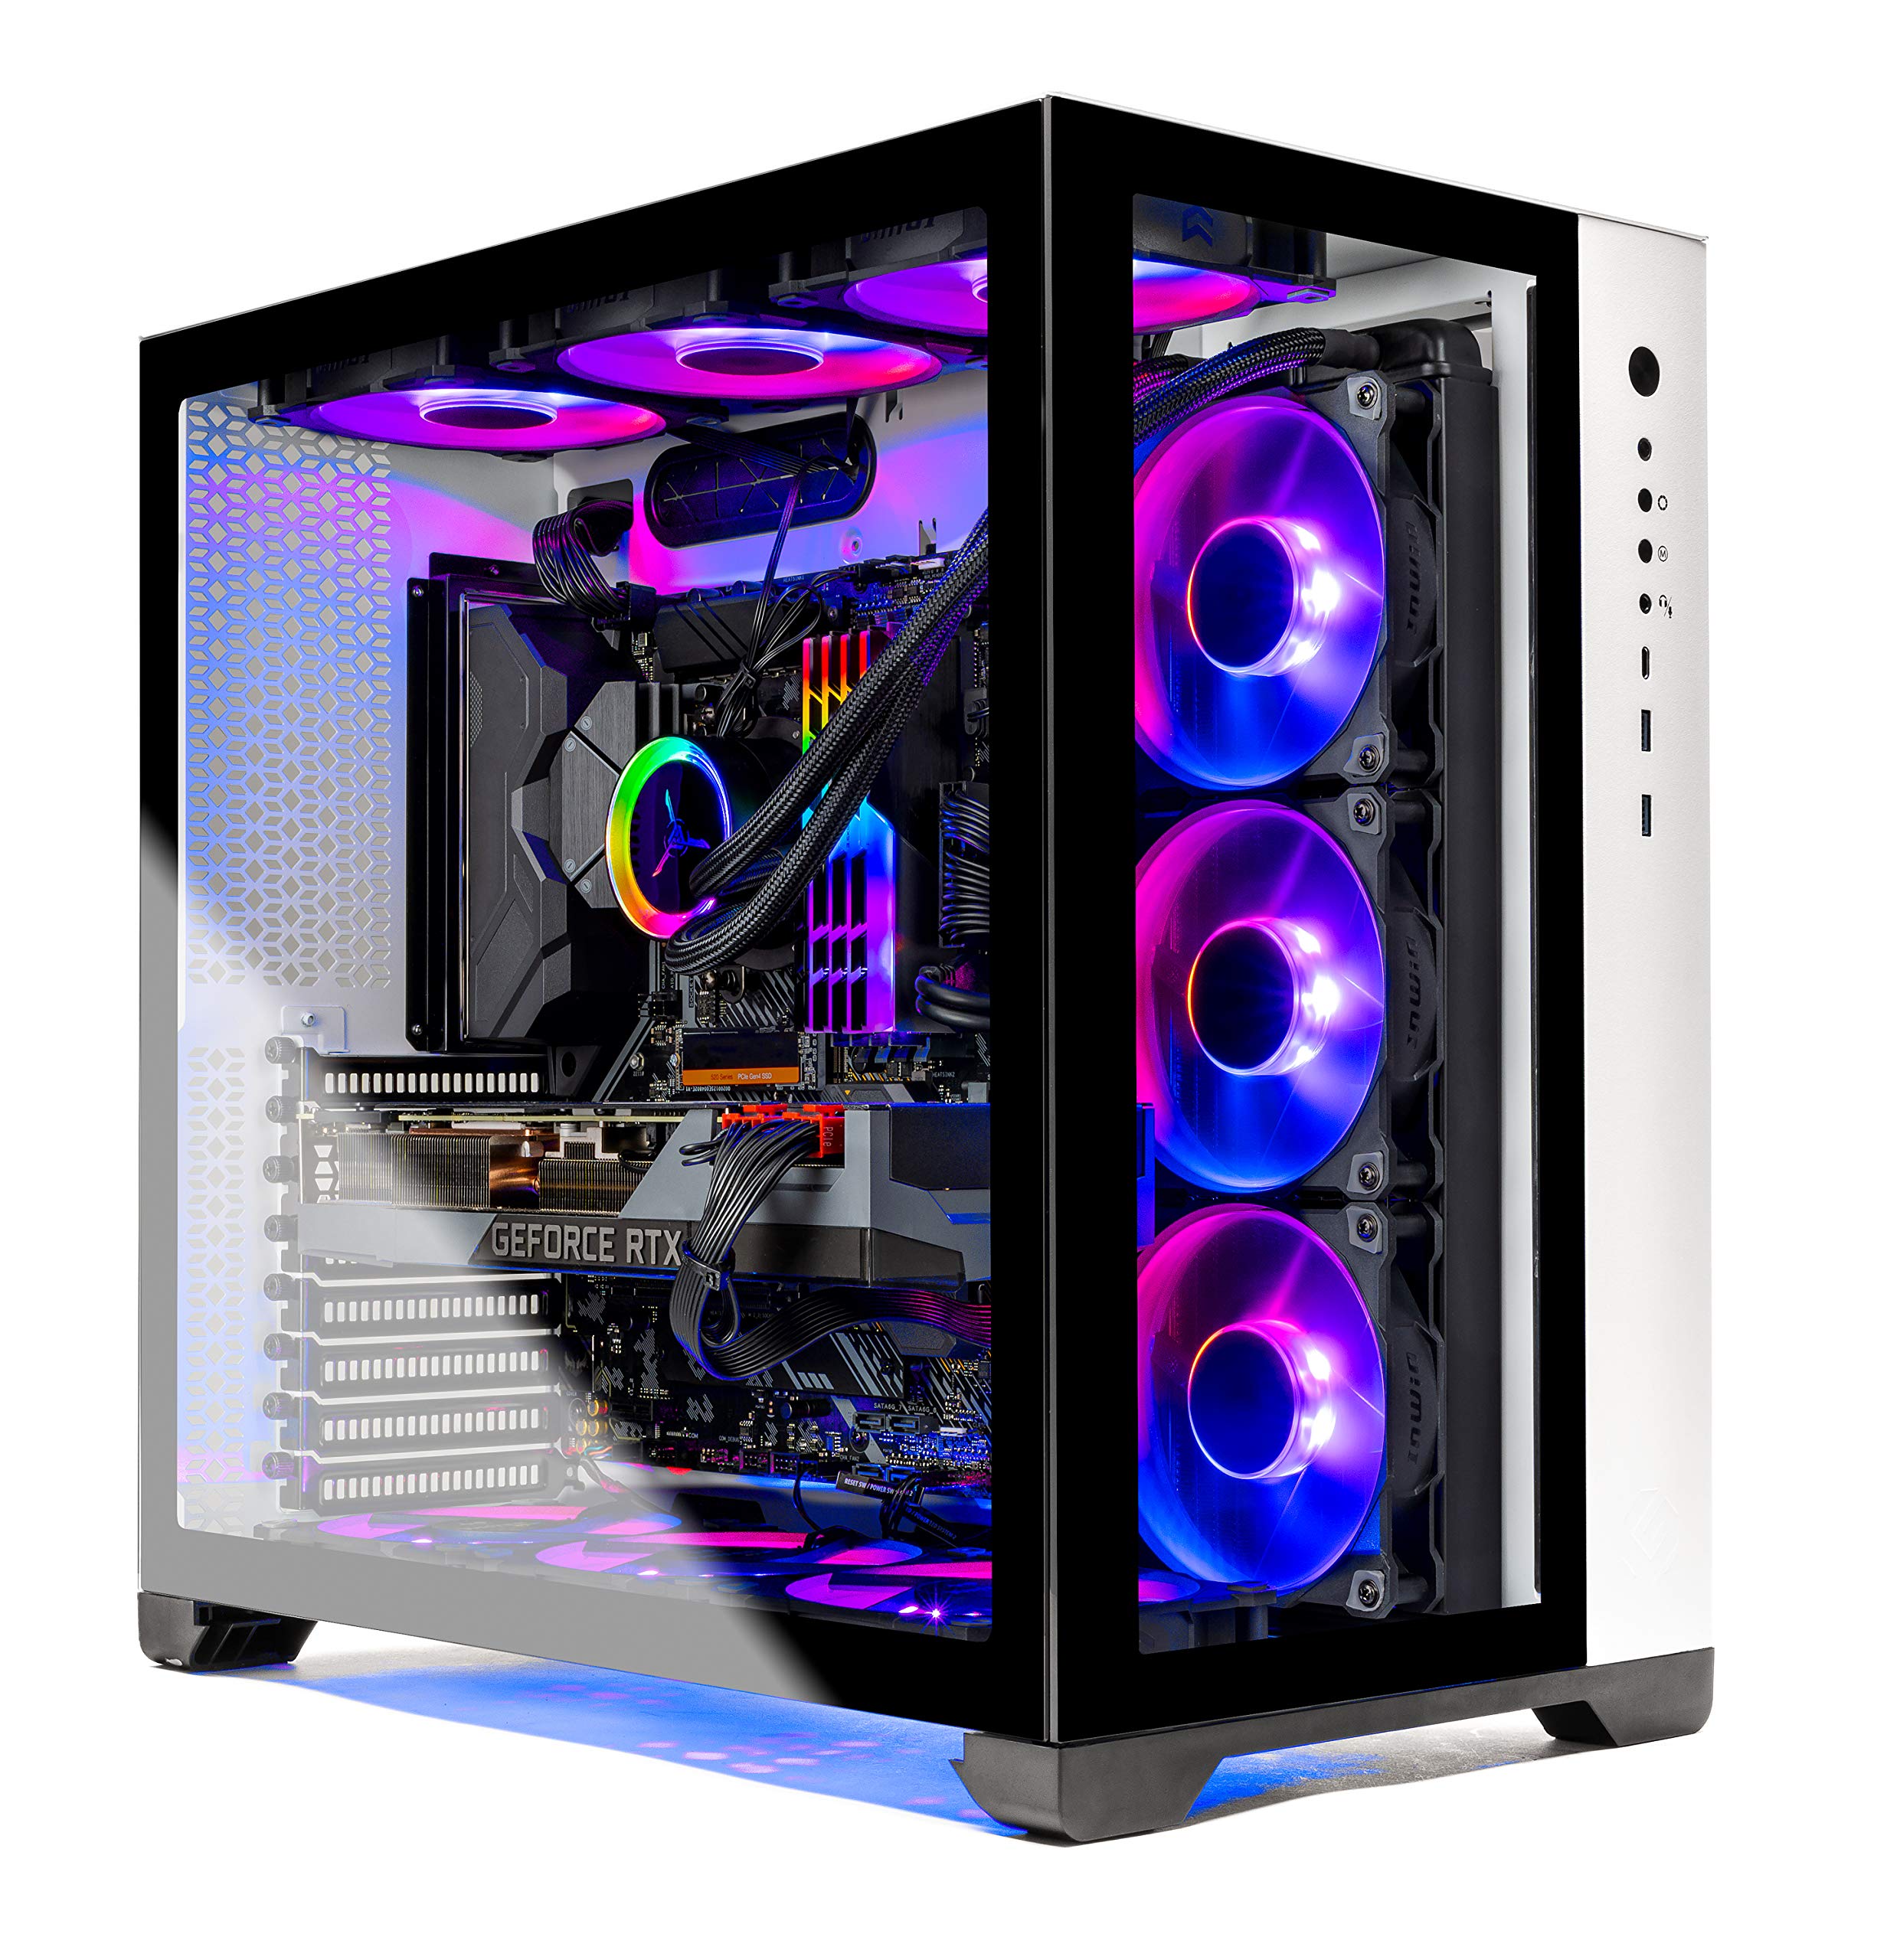 Specs of high-performance gaming PC